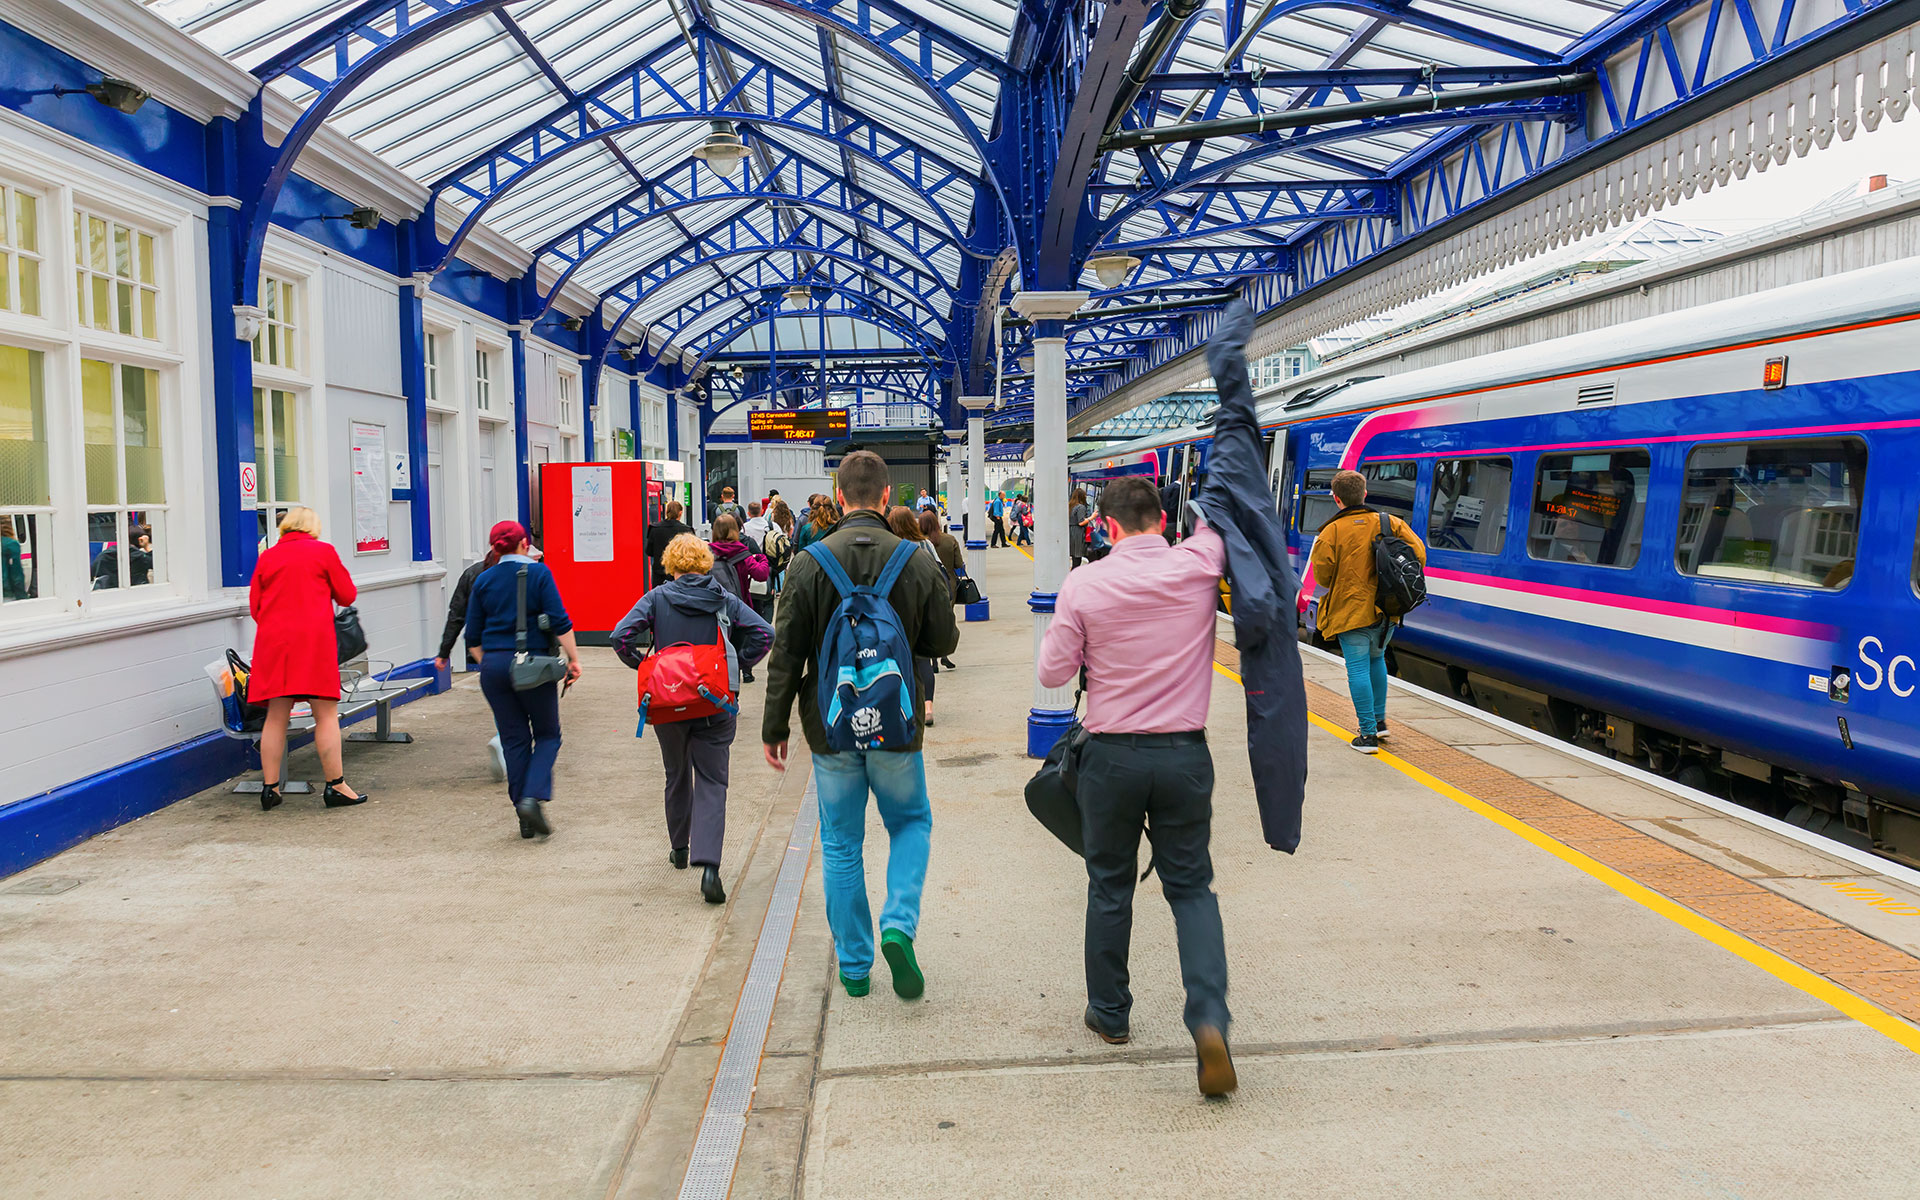 The timetable changes in December 2018 will see the reinstatement of a second Stirling to London King's Cross direct train (photo © Madrabothair / dreamstime.com).